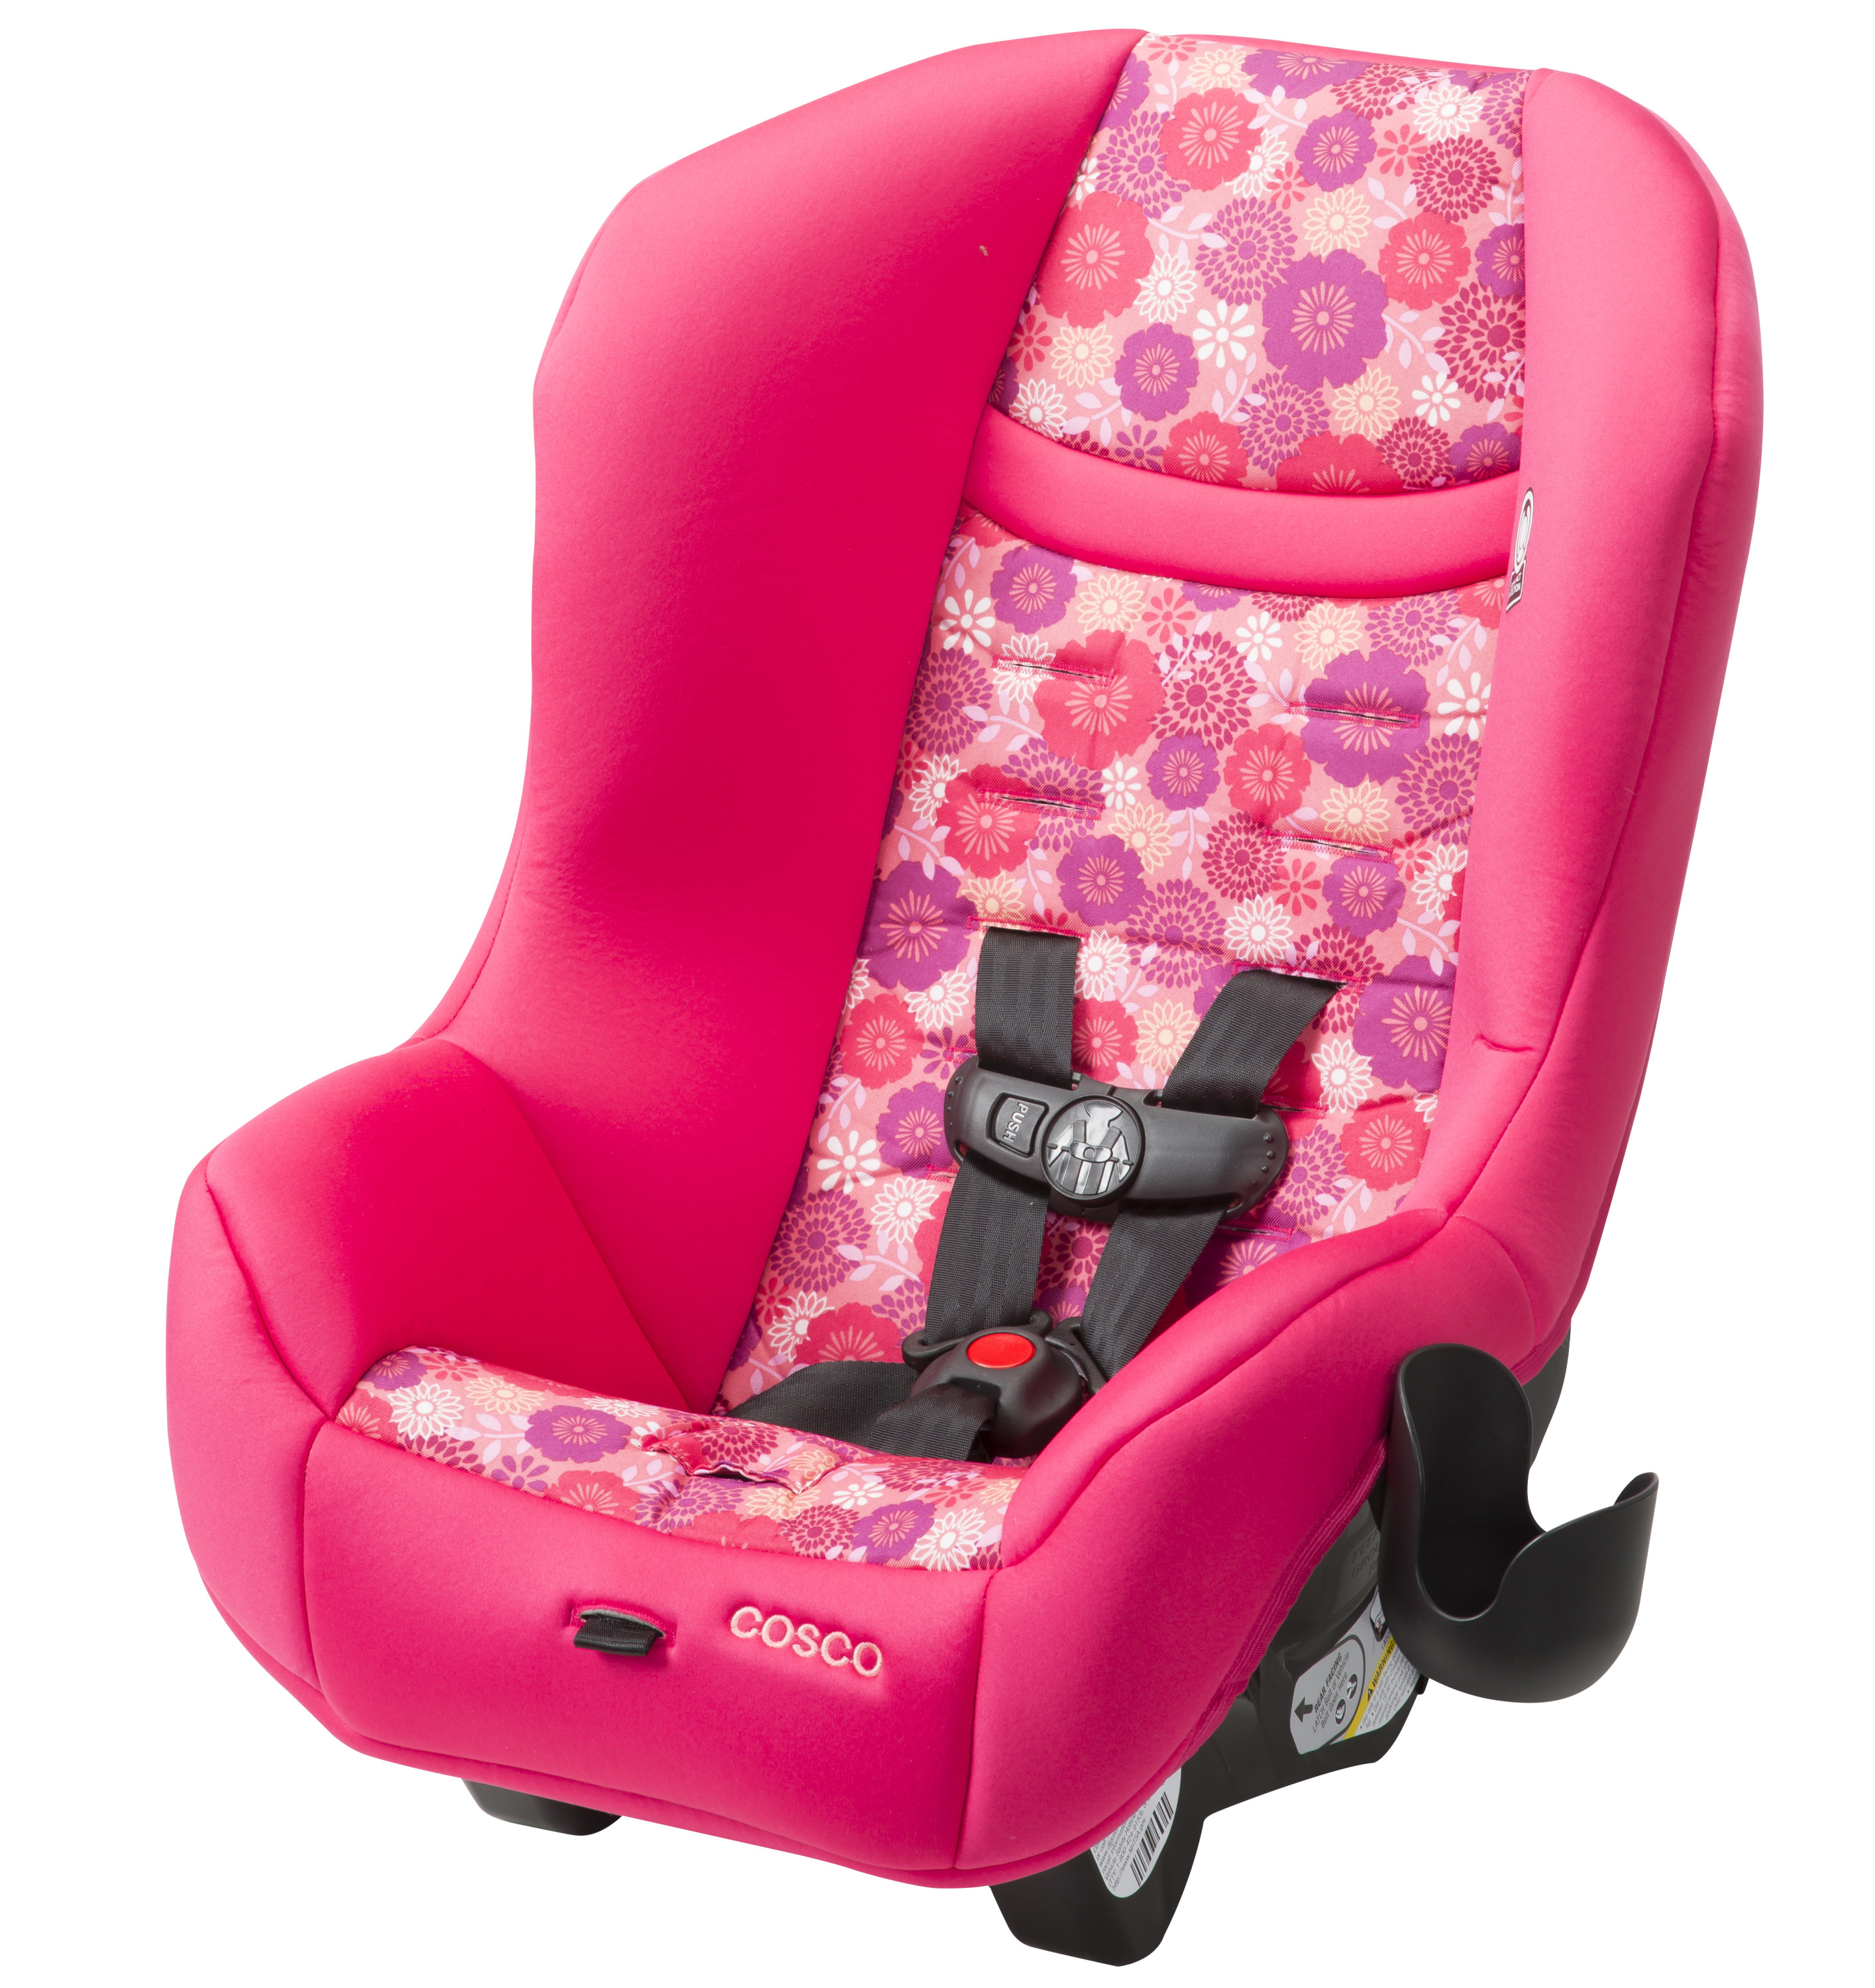 Cosco Scenera Convertible Car Seat, Floral Orchard Blossom Pink - image 1 of 13